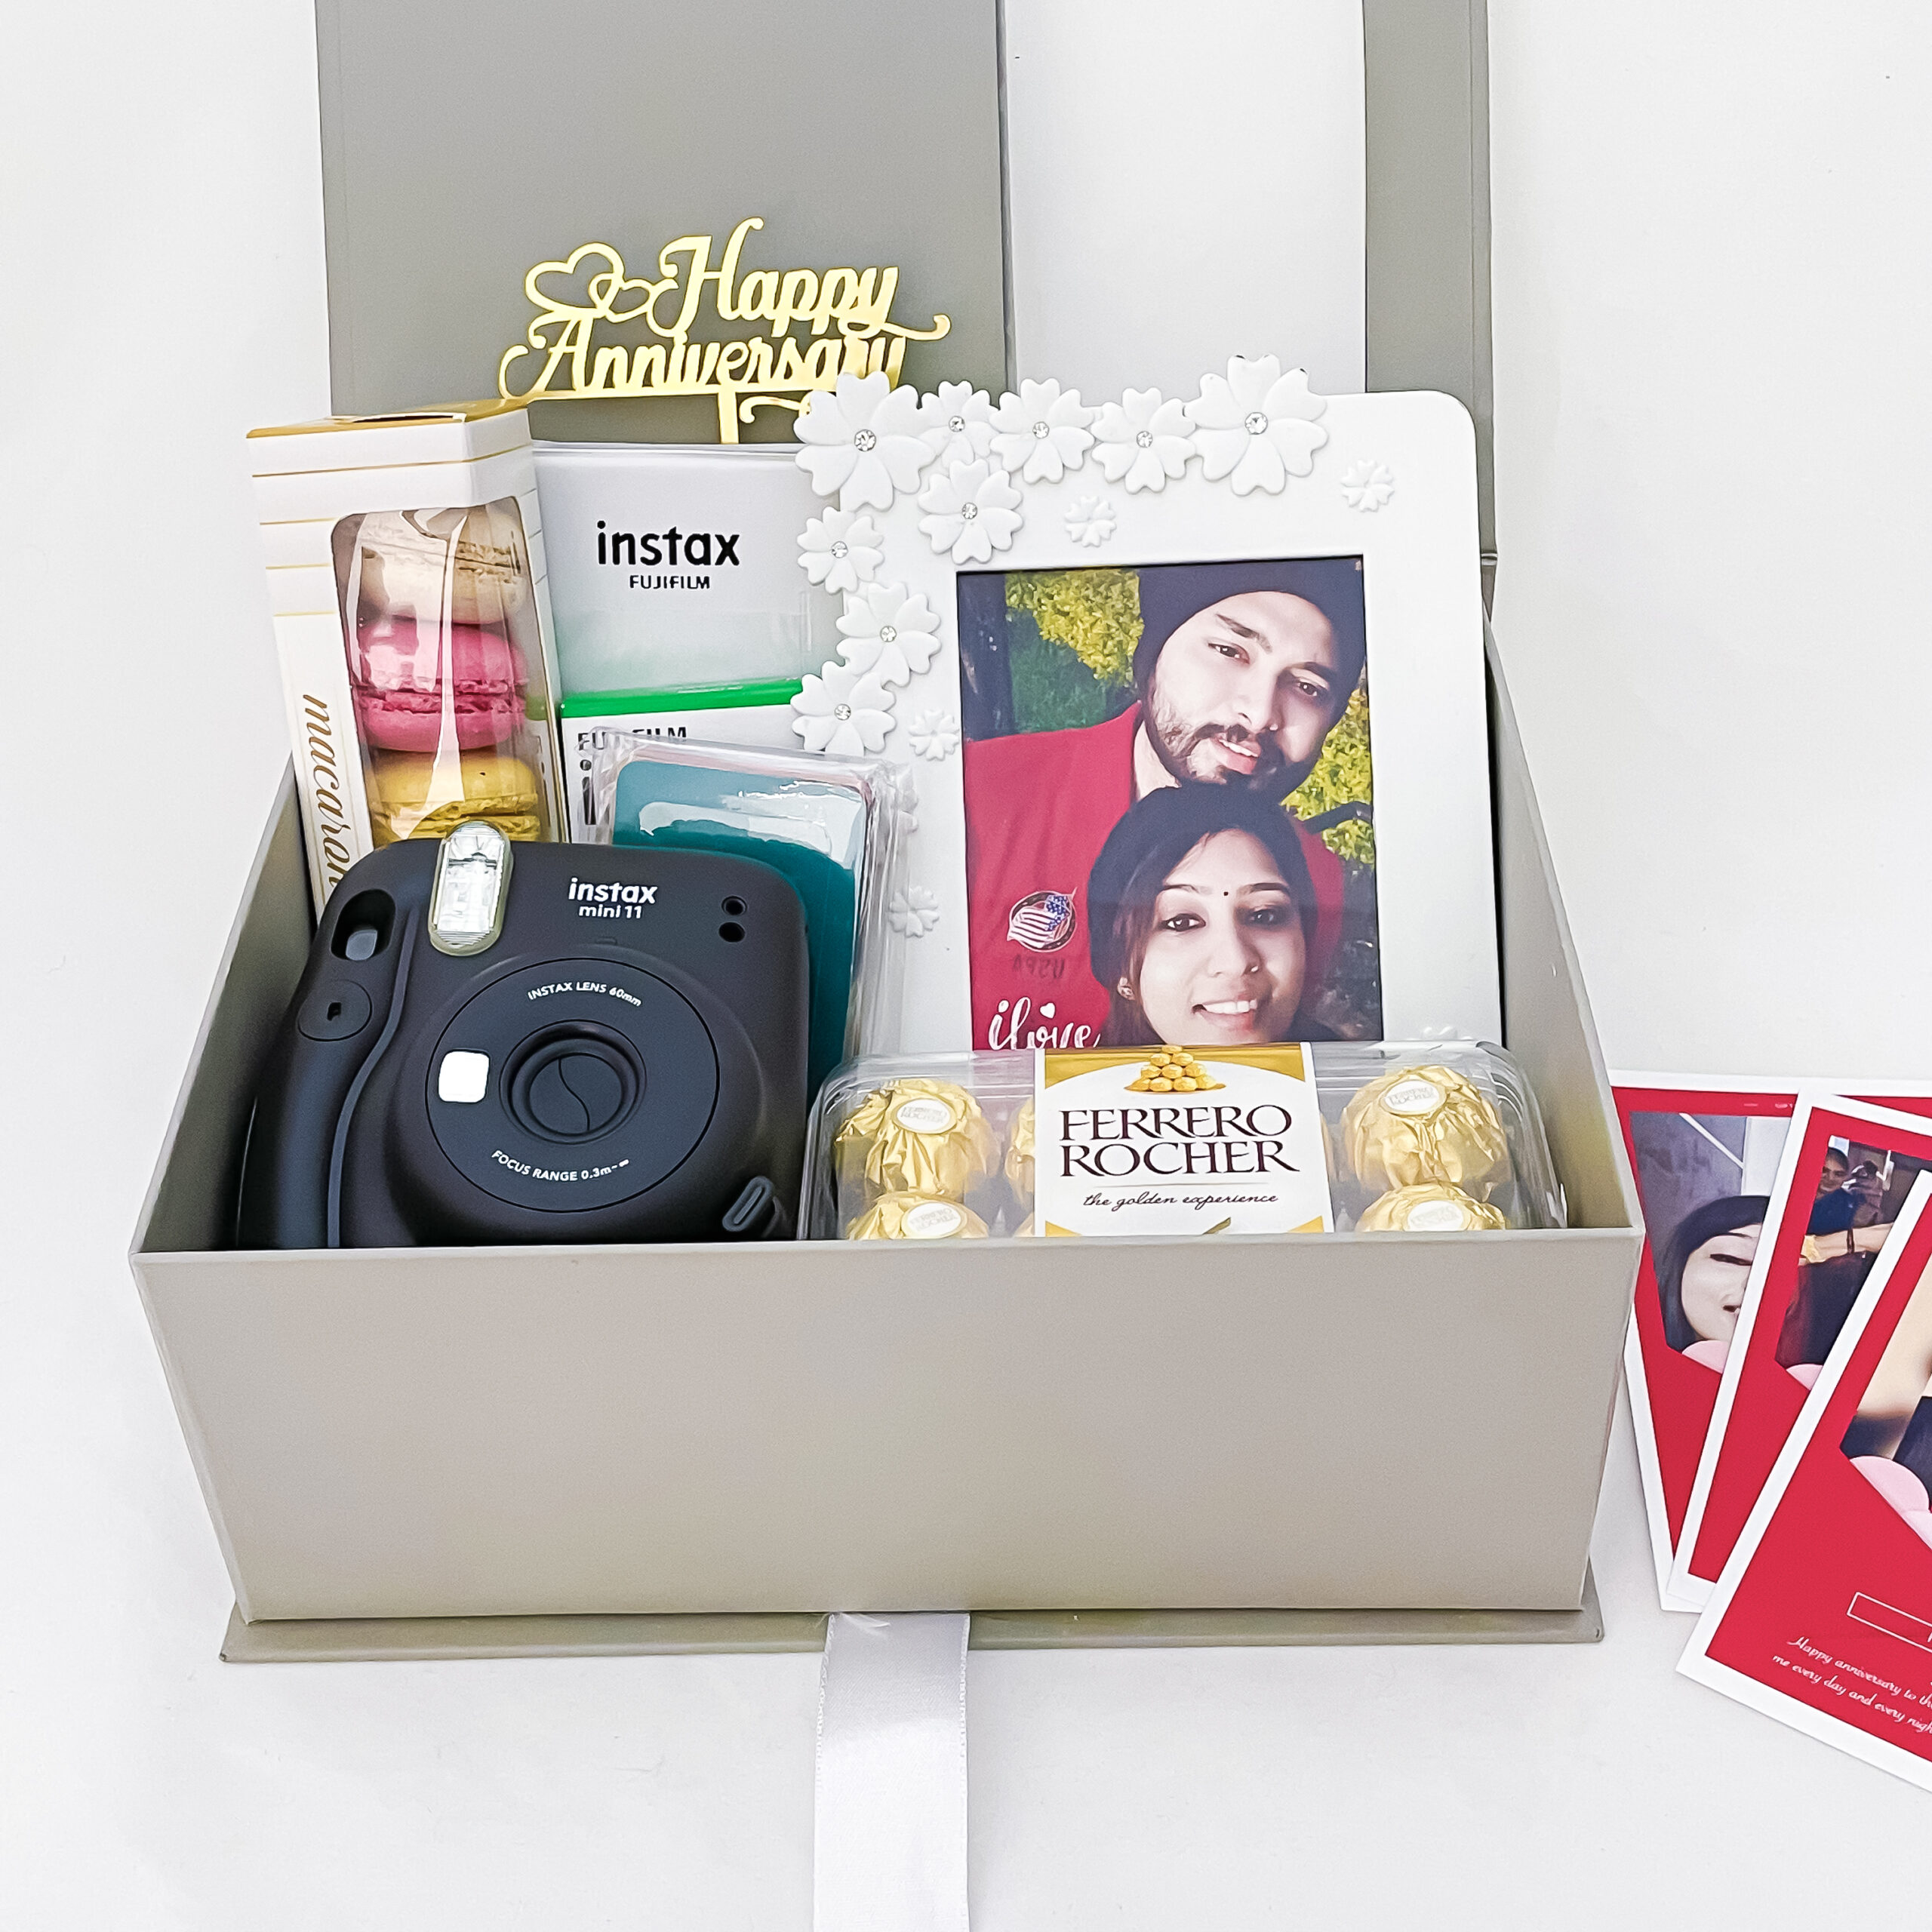 Top 10 Wedding Anniversary Gifts That Will Surprise Your Husband